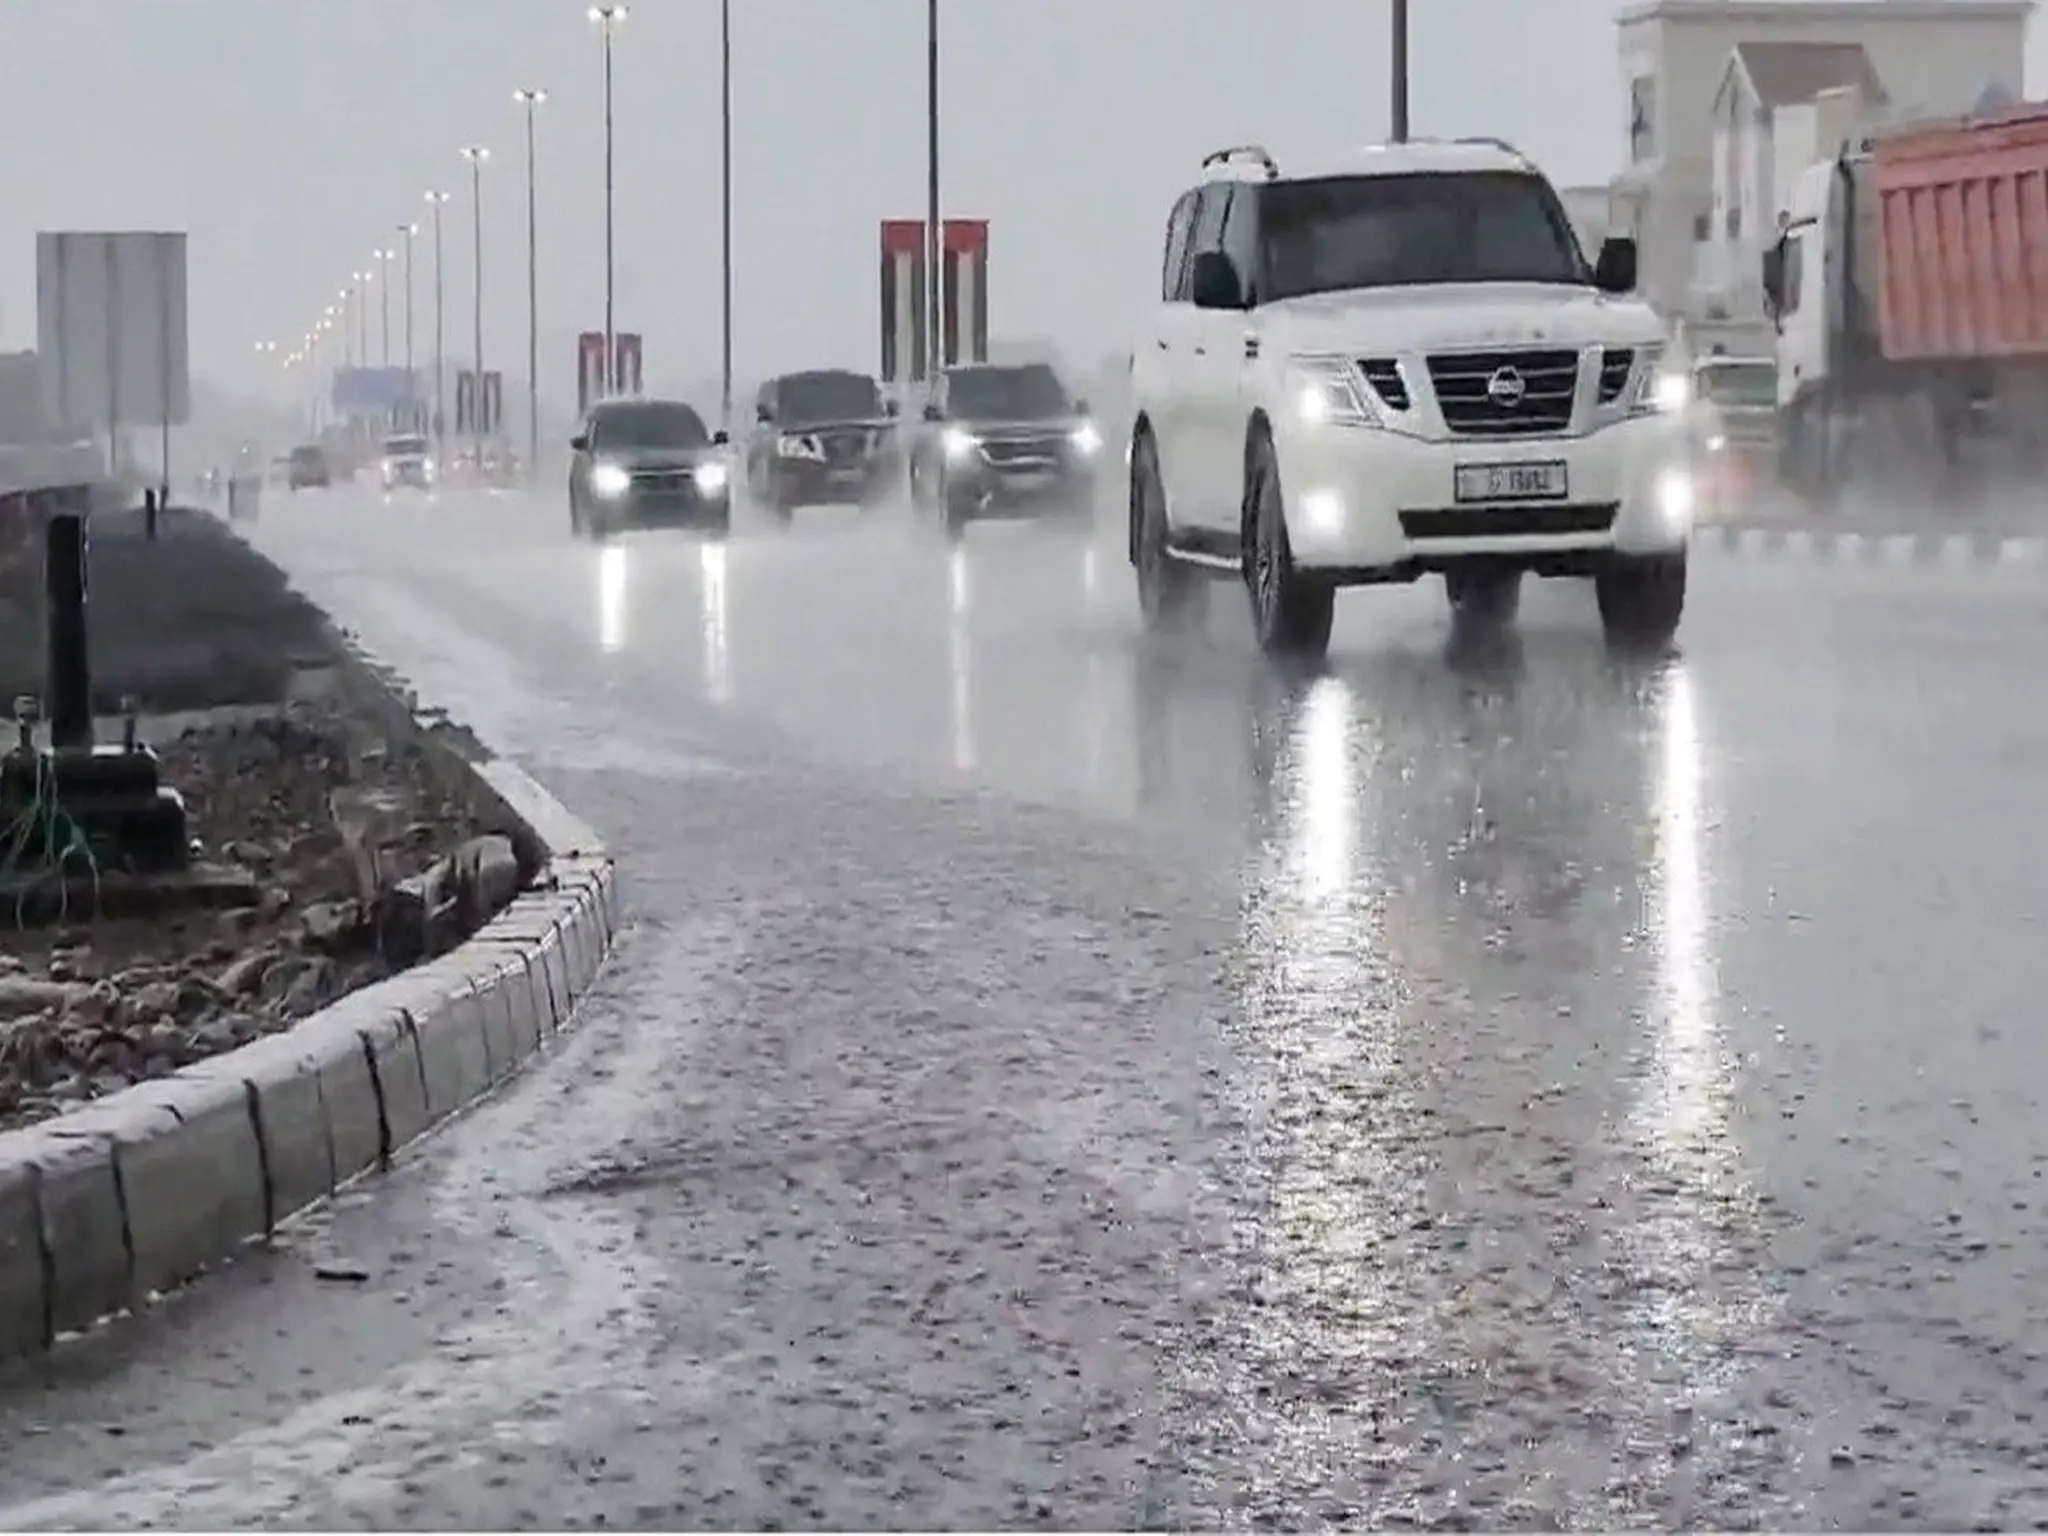 UAE Police issues a warning to residents and citizens regarding the weather conditions